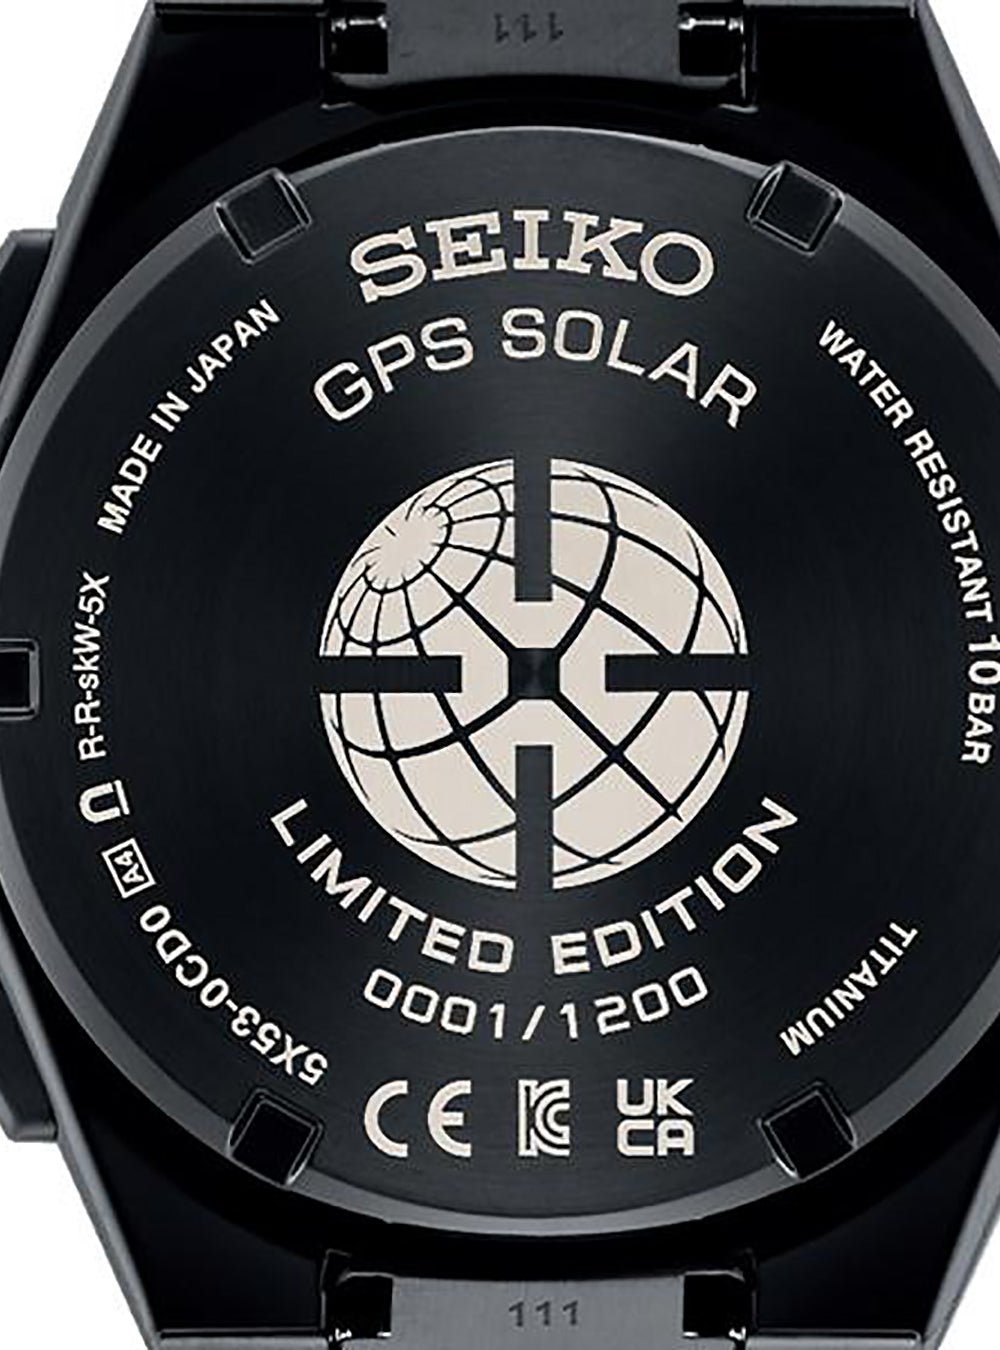 SEIKO ASTRON NEXTER GPS SOLAR 2023 LIMITED EDITION SBXC137 MADE IN JAPAN JDMWRISTWATCHjapan-select